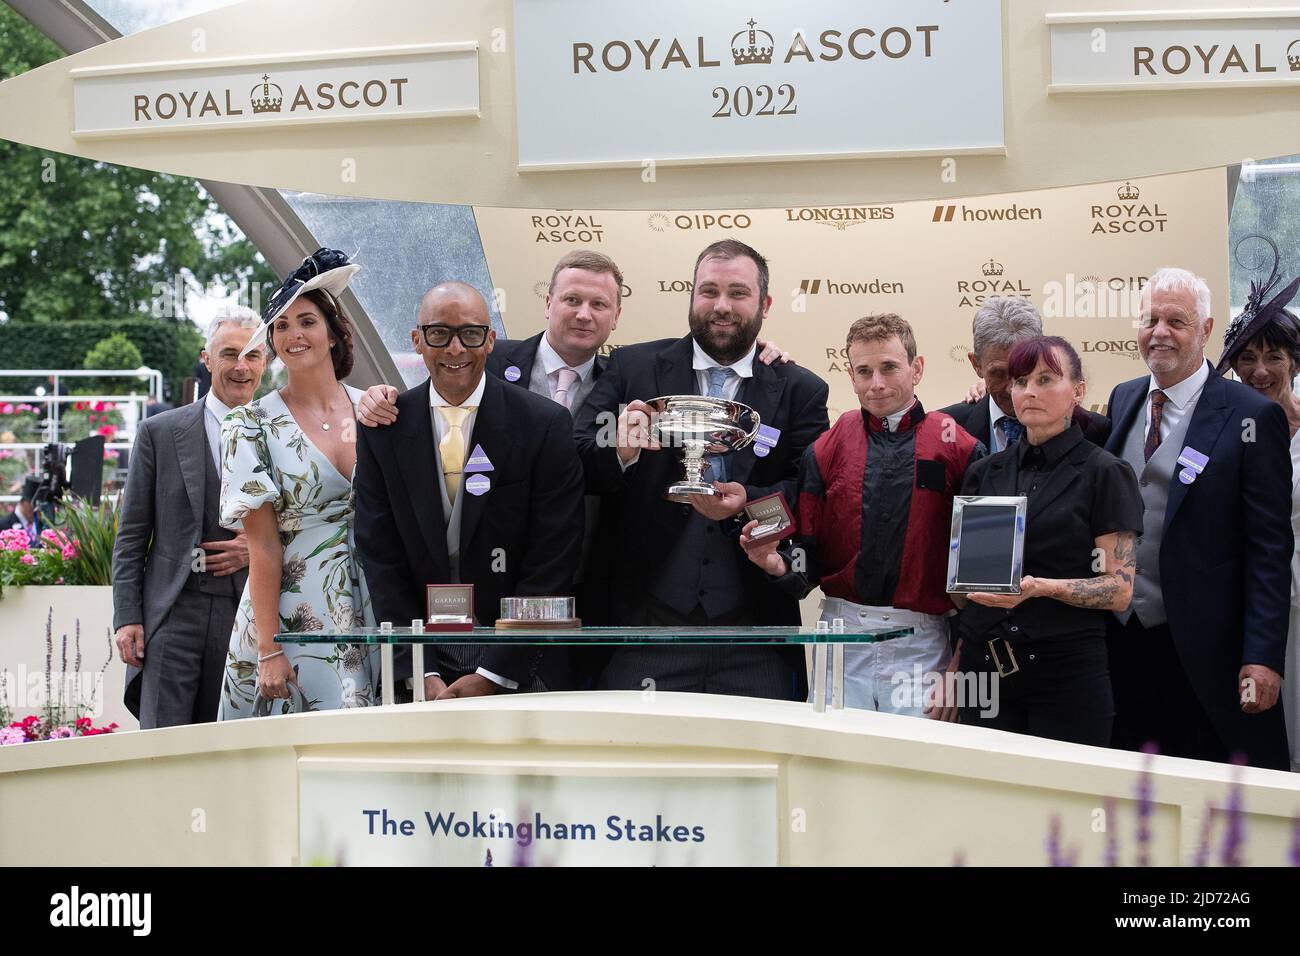 Ascot, Berkshire, UK. 18th June, 2022. Horse Rohann ridden by jockey Ryan Moore wins the Wokingham Stakes. The winning owners and trainer presentation was made by TV personality Jay Blades MBE who is known for appearing on the programme The Repair Shop and his upcycling projects. Credit: Maureen McLean/Alamy Live News Stock Photo